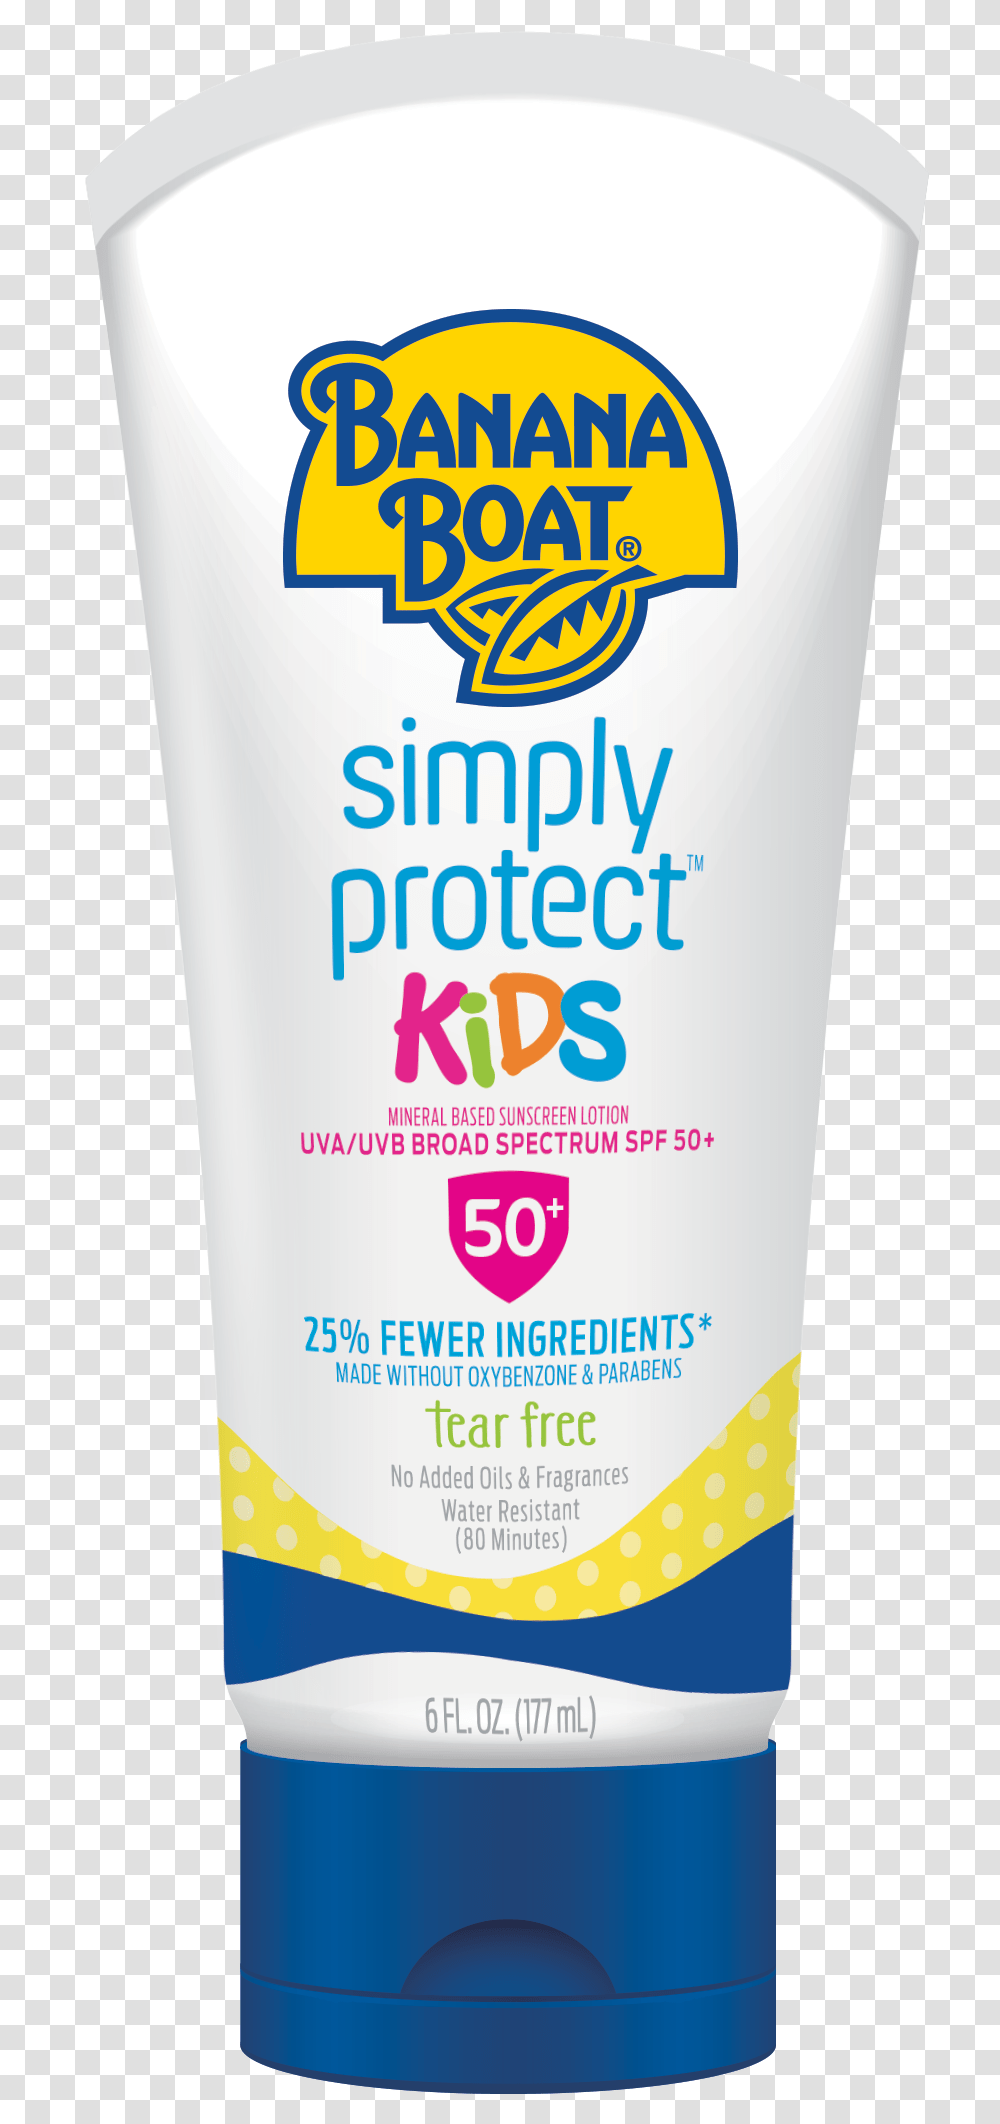 Bb Simplyprotect Kids Spf50 177ml Tube Nonew Cosmetics, Sunscreen, Bottle Transparent Png